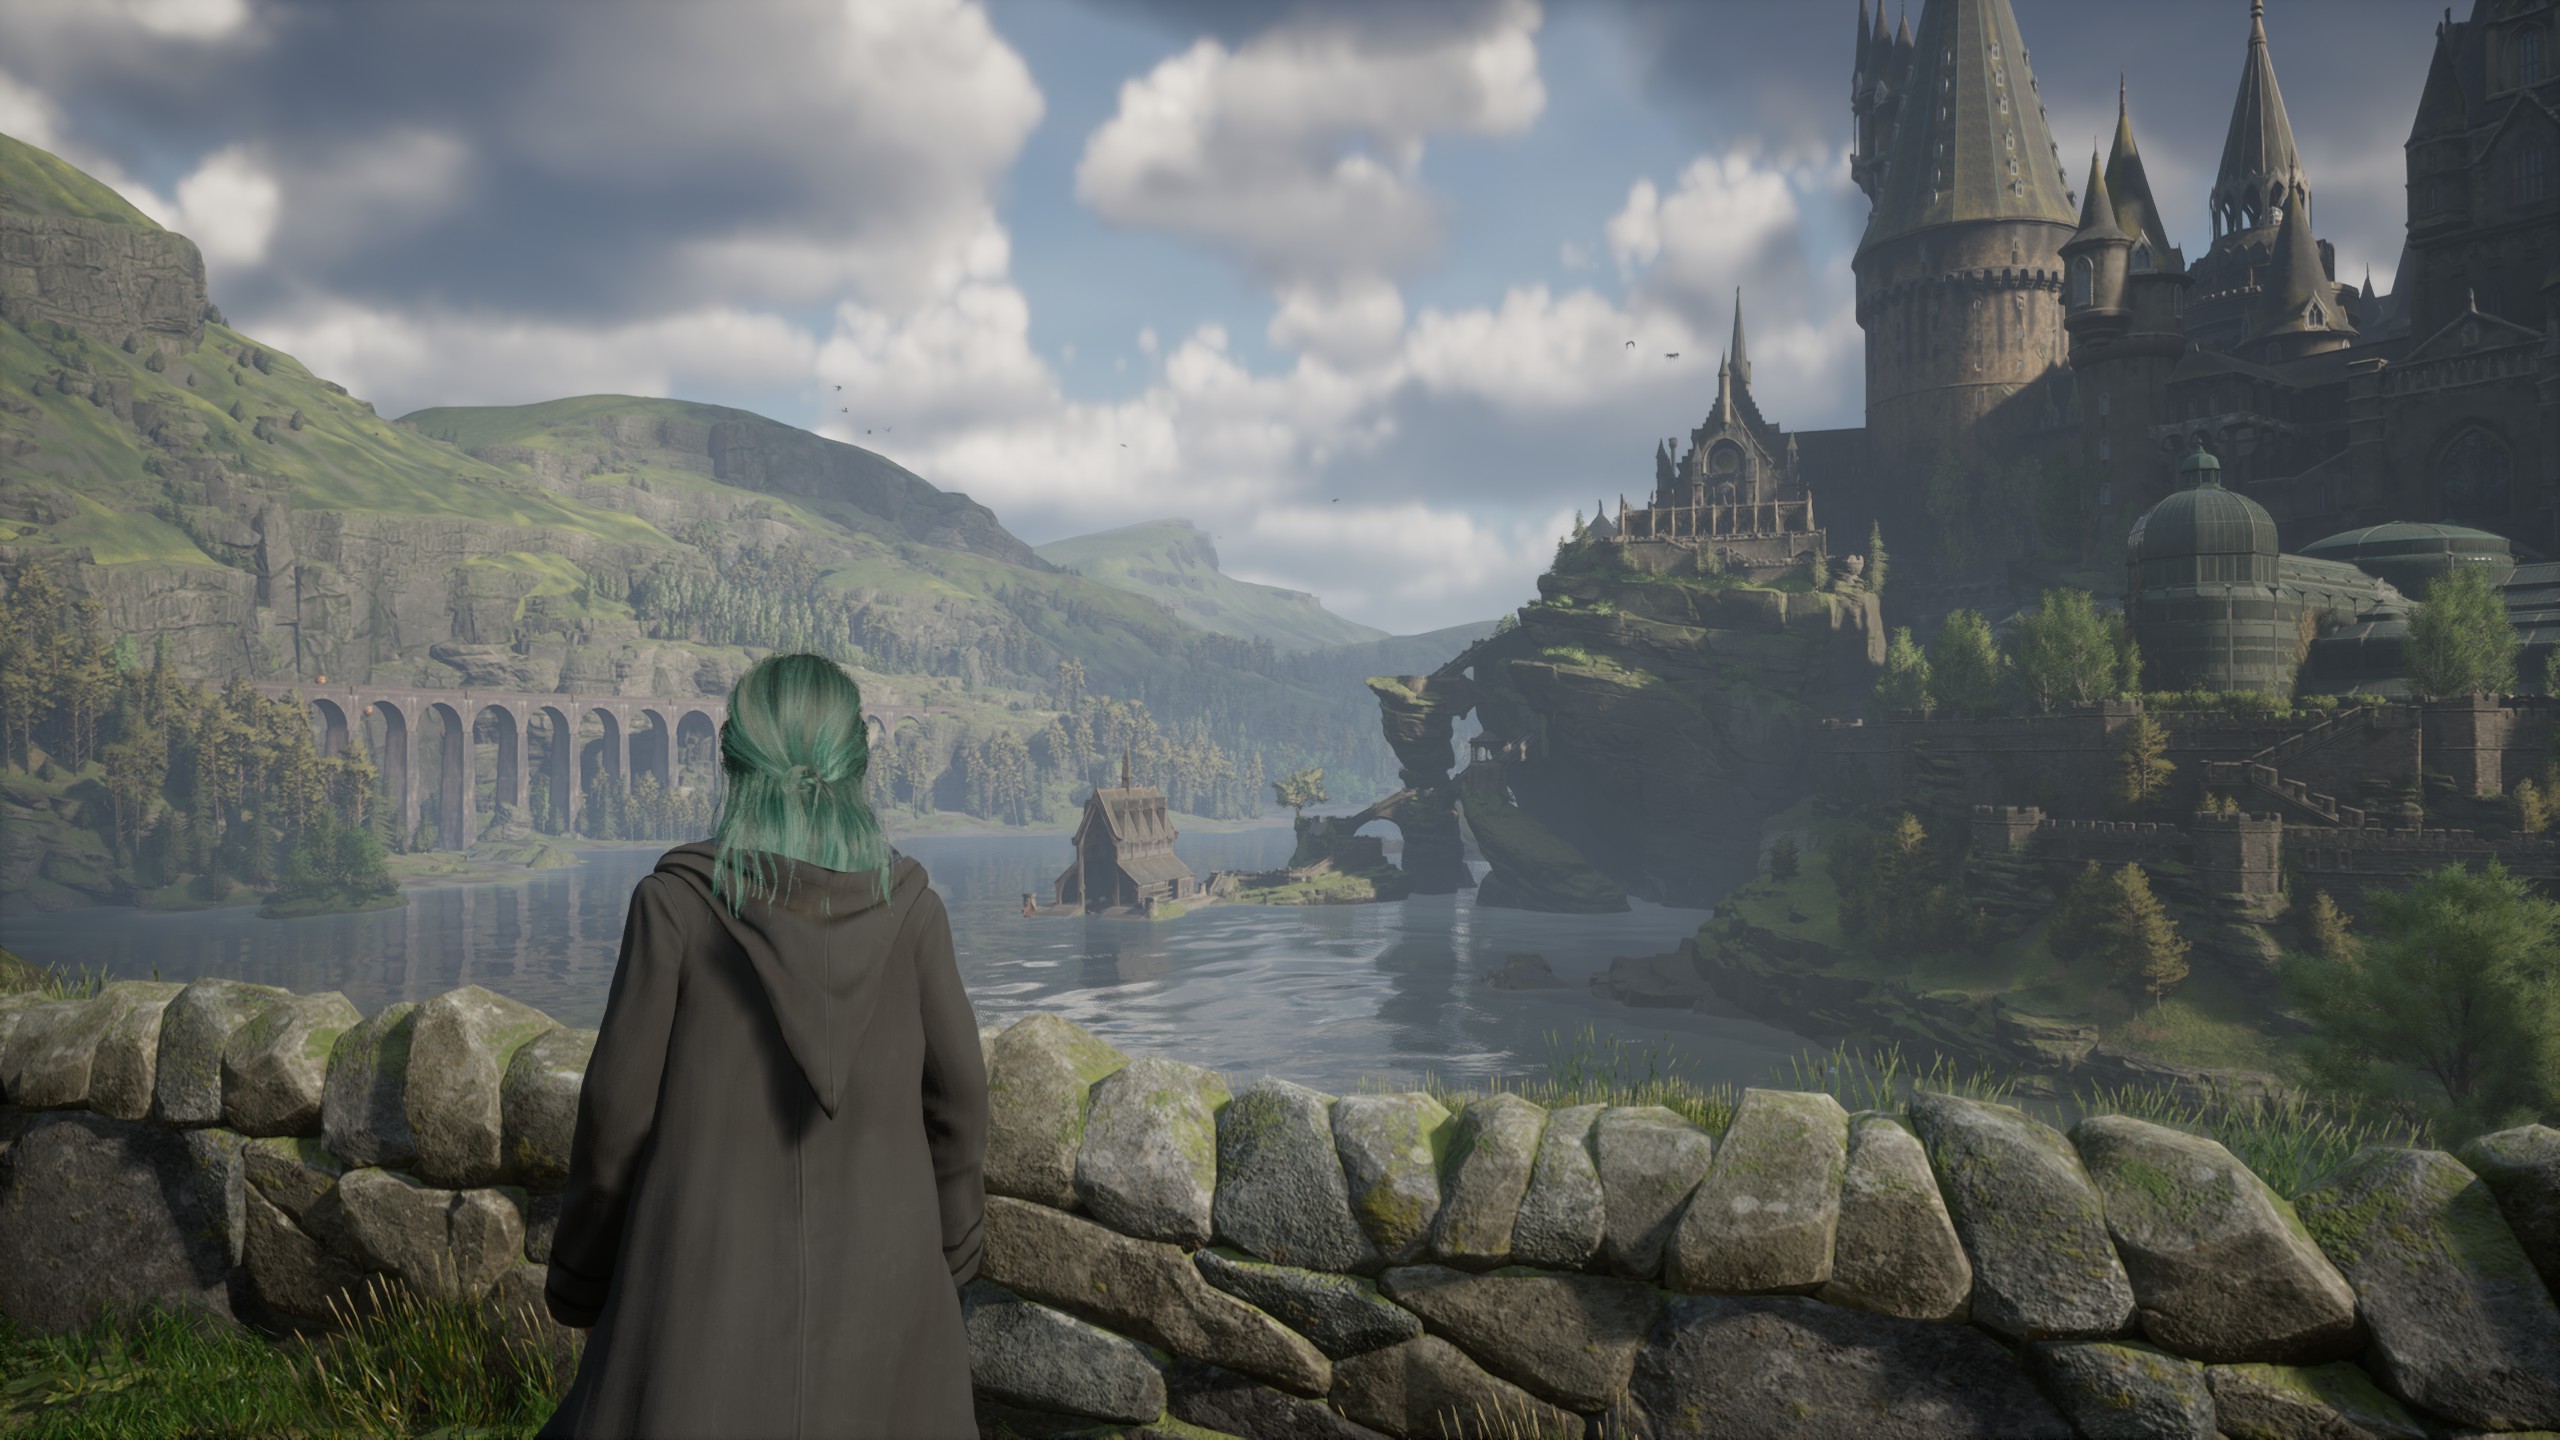 Hogwarts Legacy fans need to try this stunning free Steam download